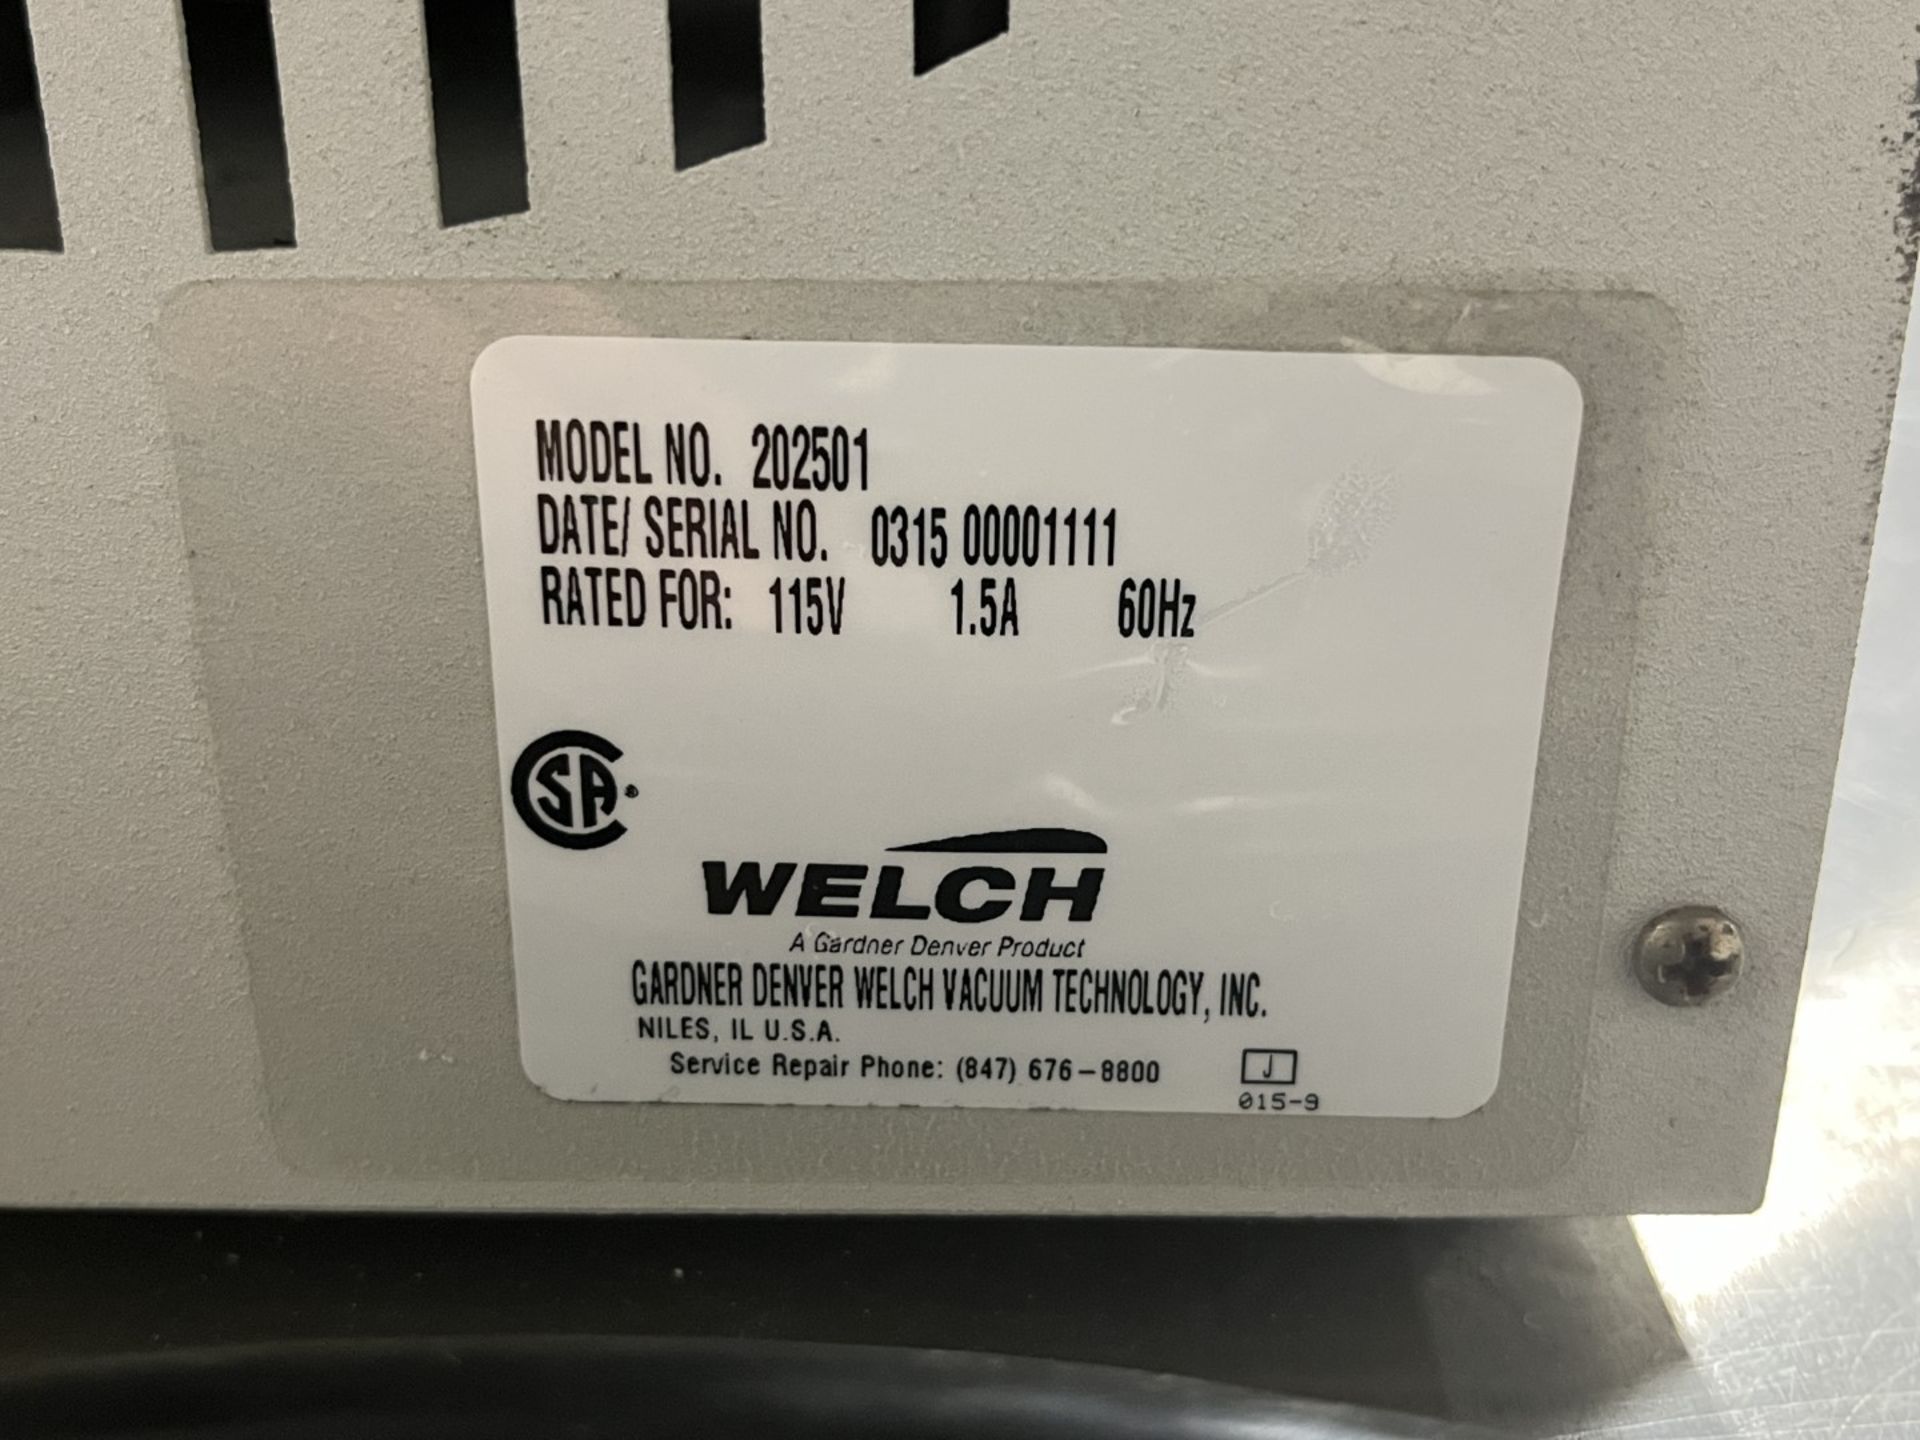 Welch self-cleaning dry vacuum system, model 202501, 115 volt, serial# 00001111, built in 2015. (TAG - Image 2 of 5